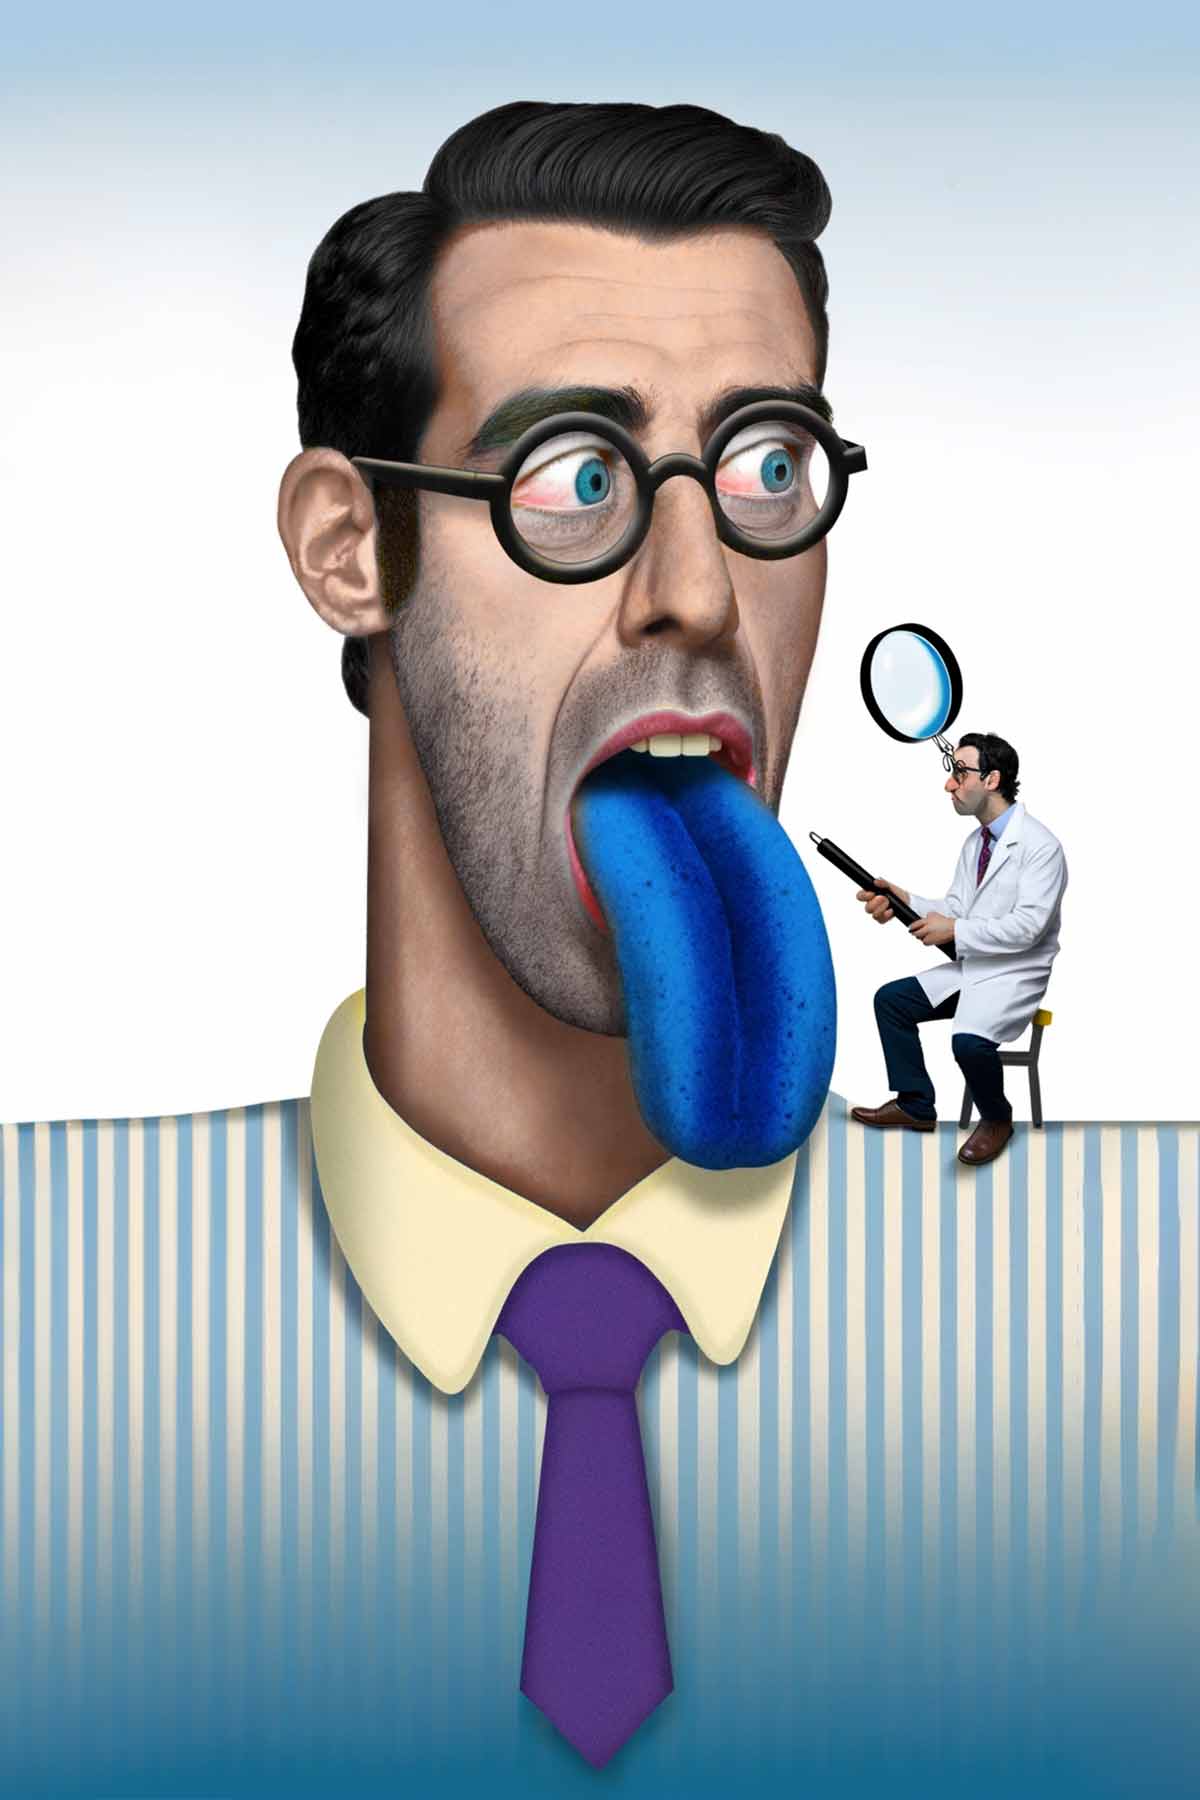 An illustration of a man sticking out his tongue, which is blue. A tiny doctor is examining it.